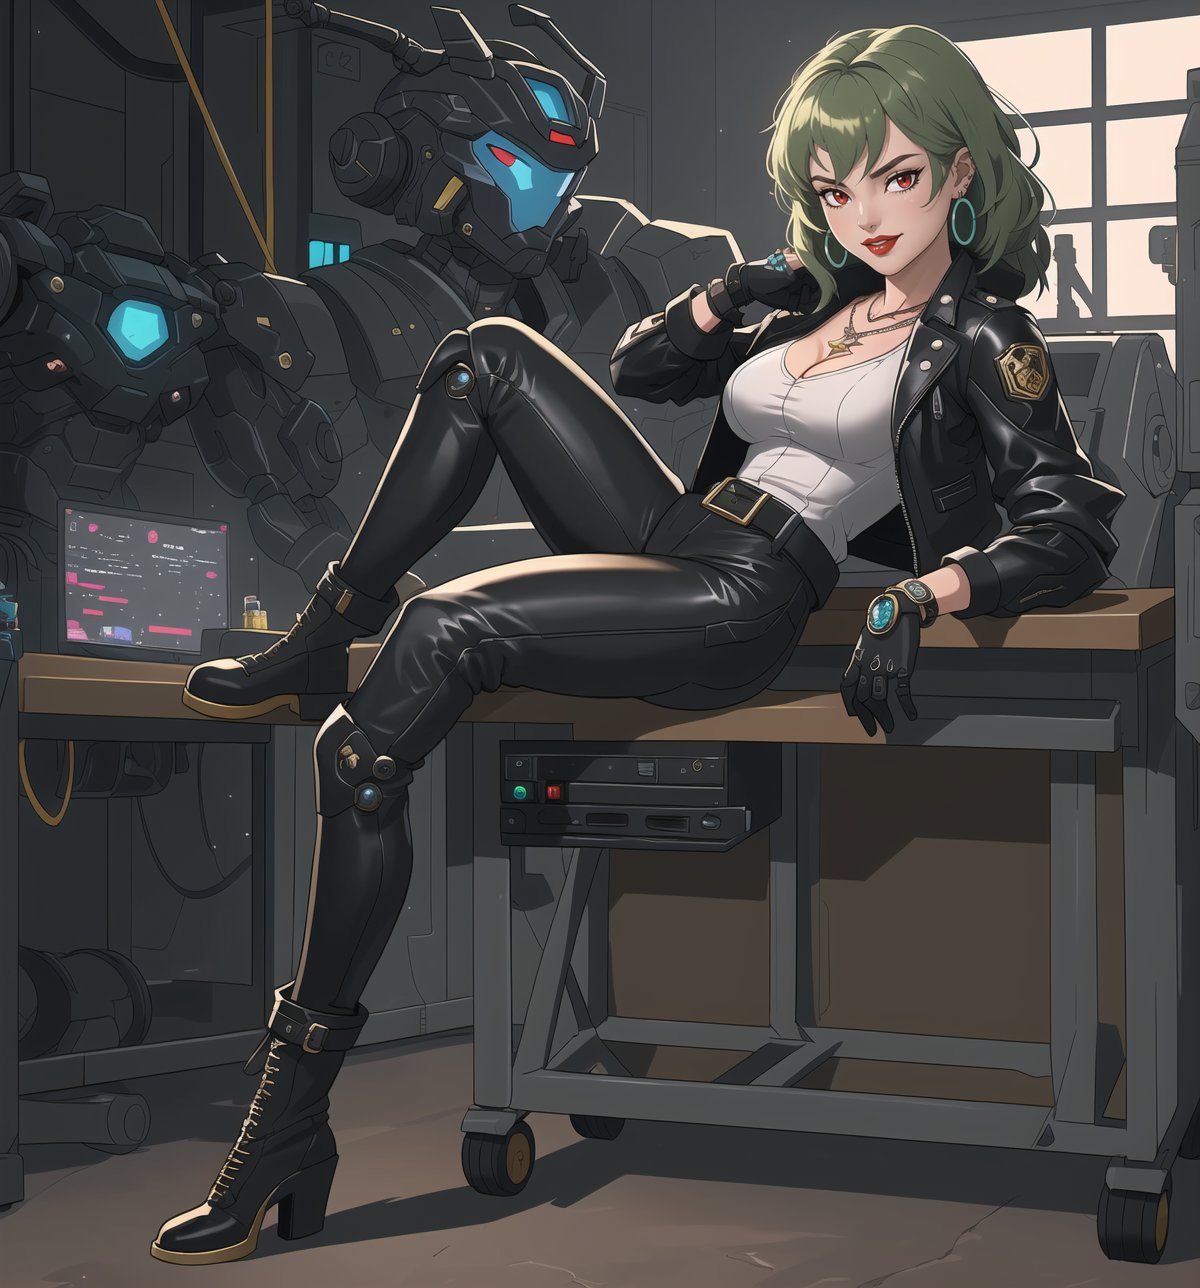 A sci-fi, mecha, adventure, futuristic and technological masterpiece rendered in ultra-high resolution with graphic detail. | A beautiful and sensual 26 year old woman named Mika, wearing a sexy Mecha costume consisting of a black leather jacket with silver details, black leather pants with silver details, black leather belt with silver gear-shaped buckle, boots high top in black leather with silver details and black leather gloves. She also has accessories such as a pair of silver gear-shaped earrings, a gold necklace with a robot-shaped pendant, leather and steel bracelets on her hands, and a silver ring with a small diamond on her right hand. Her short, shaggy green hair has a modern, stylish cut. Her red eyes are looking at the viewer with a seductive expression, while she smiles with her mouth open, showing her teeth and wearing red lipstick. She is standing on the floor, in a laboratory, with steel and glass structures, high-tech machines and equipment, a work table with robot plans and a computer screen. | The image highlights Mika's imposing and sensual figure, her curves and the accessories she wears. The scene's soft, cool lighting highlights the scene's details and creates dramatic shadows. | Soft, moody lighting effects create a sensual and mysterious atmosphere, while detailed textures on skin, fabrics and structures add realism to the image. | A sensual, futuristic scene of a beautiful woman wearing a sexy Mecha suit in a high-tech laboratory, exploring themes of adventure, desire, seduction and science fiction. | (((((The image reveals a full-body shot as she assumes a sensual pose, engagingly leaning against a structure within the scene in an exciting manner. She takes on a relaxed pose as she interacts, boldly leaning on a structure, leaning back in an exciting way))))). | ((full-body shot)), ((perfect body)), ((perfect pose)), ((perfect fingers, better hands, perfect hands)), ((perfect legs, perfect feet)), ((huge breasts, big natural breasts, sagging breasts)), ((perfect design)), ((perfect composition)), ((very detailed scene, very detailed background, perfect layout, correct imperfections)), ((More Detail, Enhance))